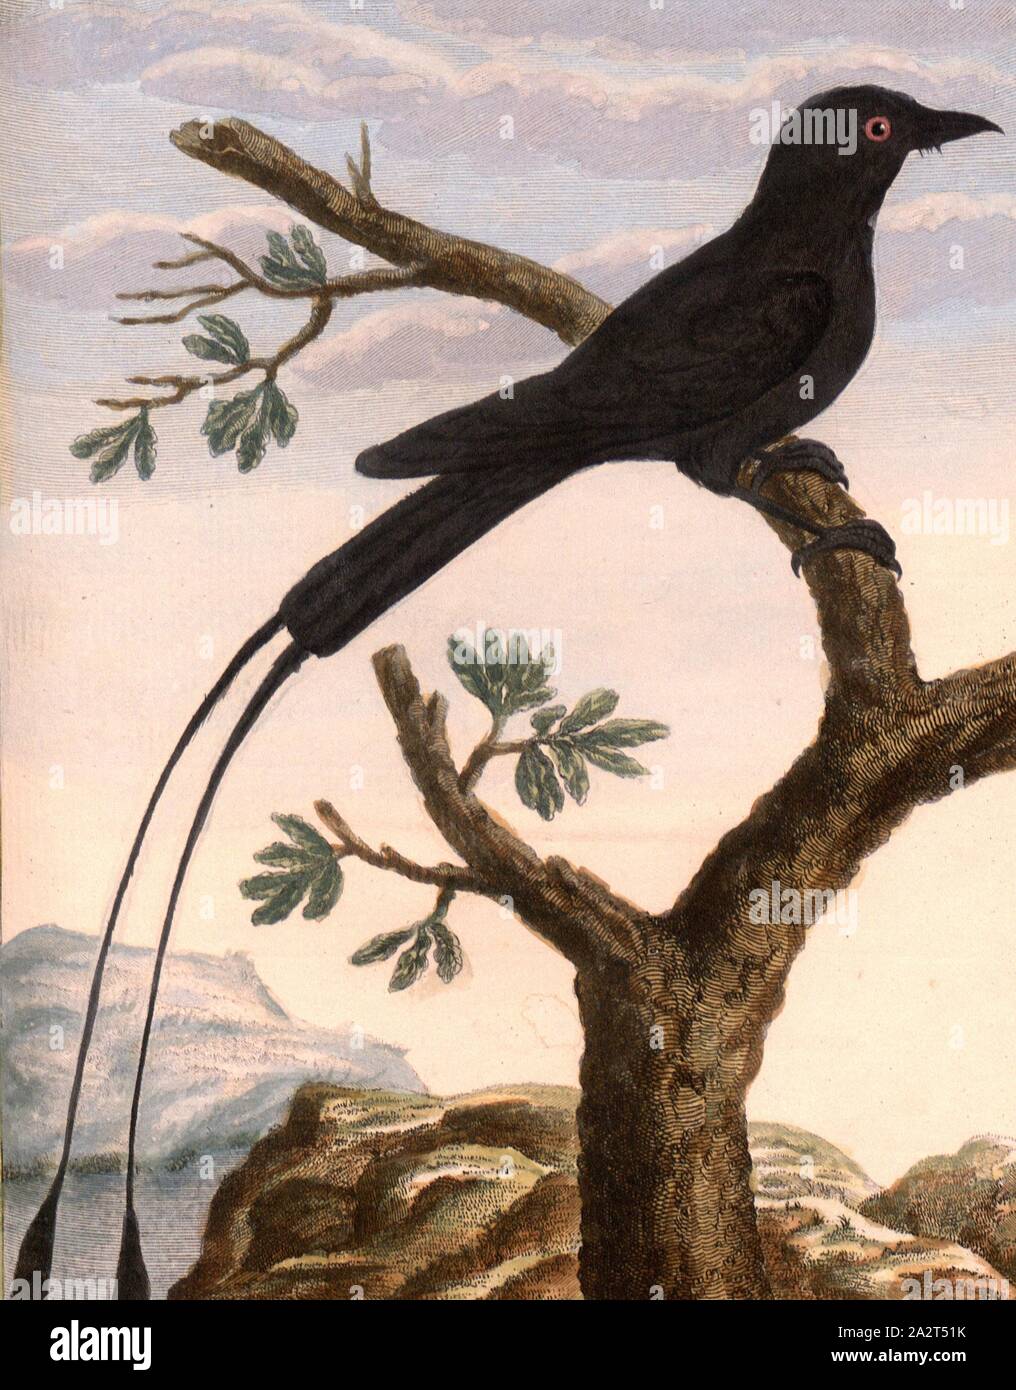 Great flycatcher on the coast of Malabar, Large flycatcher from the Malabar Coast, Signed: P. Sonnerat pinx, J.J. Avril sculp, Pl. 111, after p. 196 (vol. 2), Sonnerat, Pierre M. (pinx.); Avril, J. J. (sculp.), 1782, Sonnerat, Pierre Stock Photo